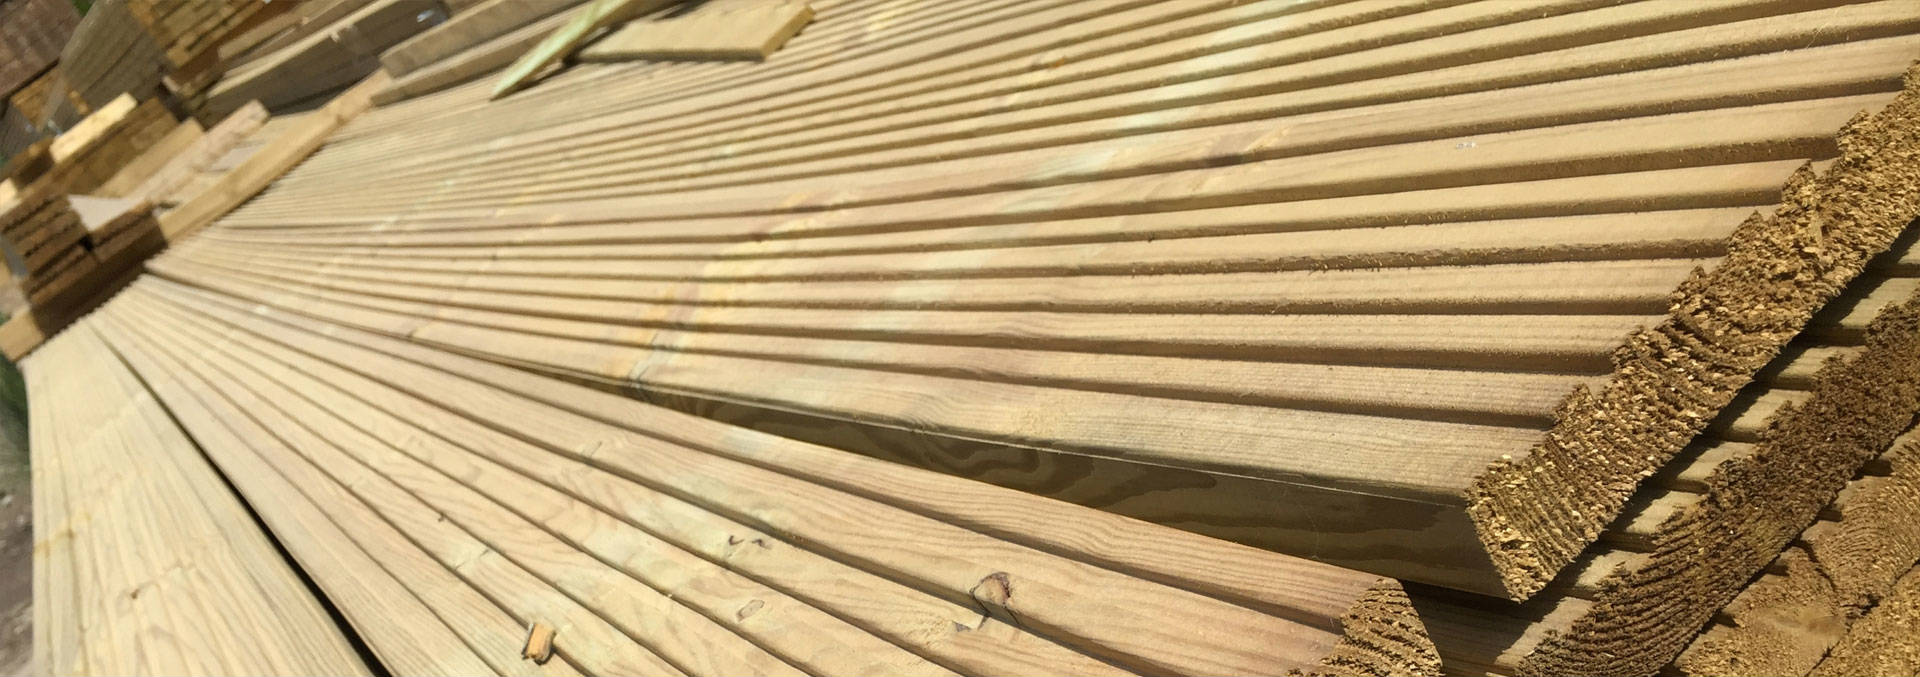 Treated Decking Boards